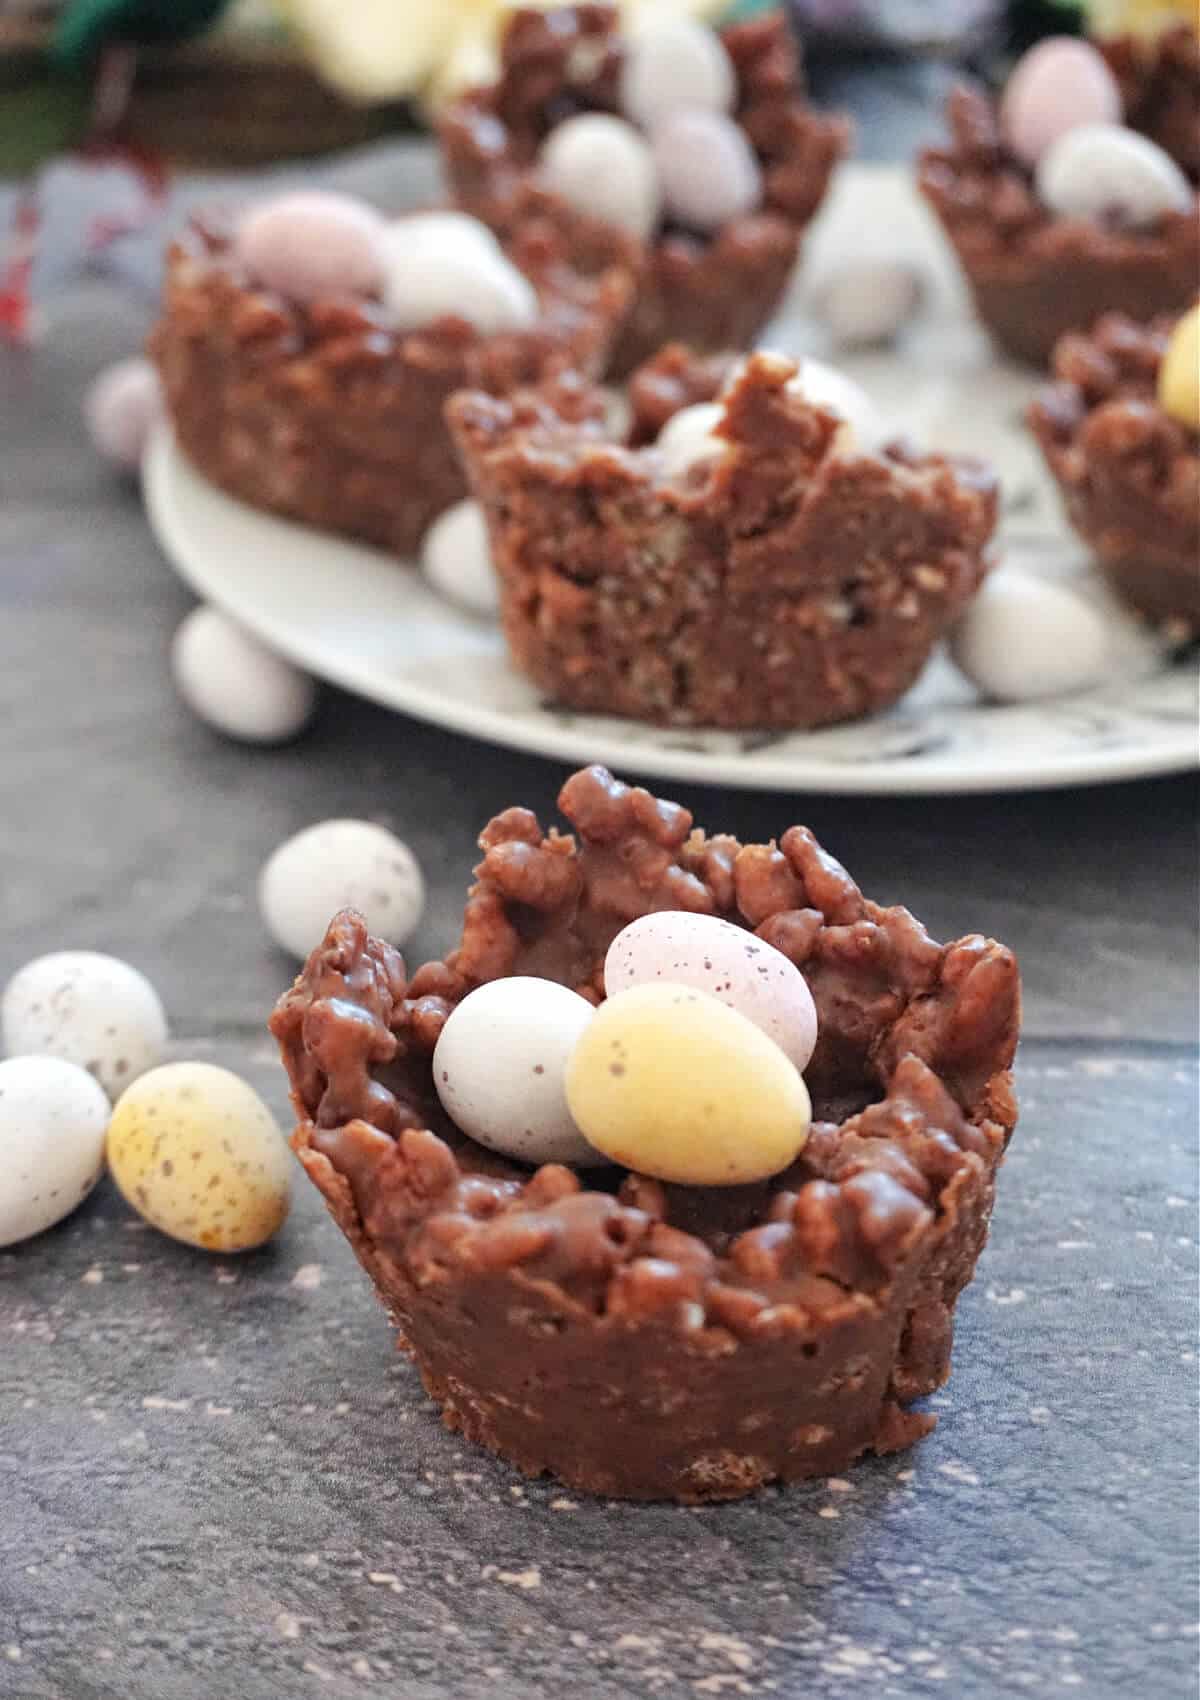 Close-up shot of a chocolate rice krispie nest filled with 3 mini chocolate eggs and a white plate with more nests in the background